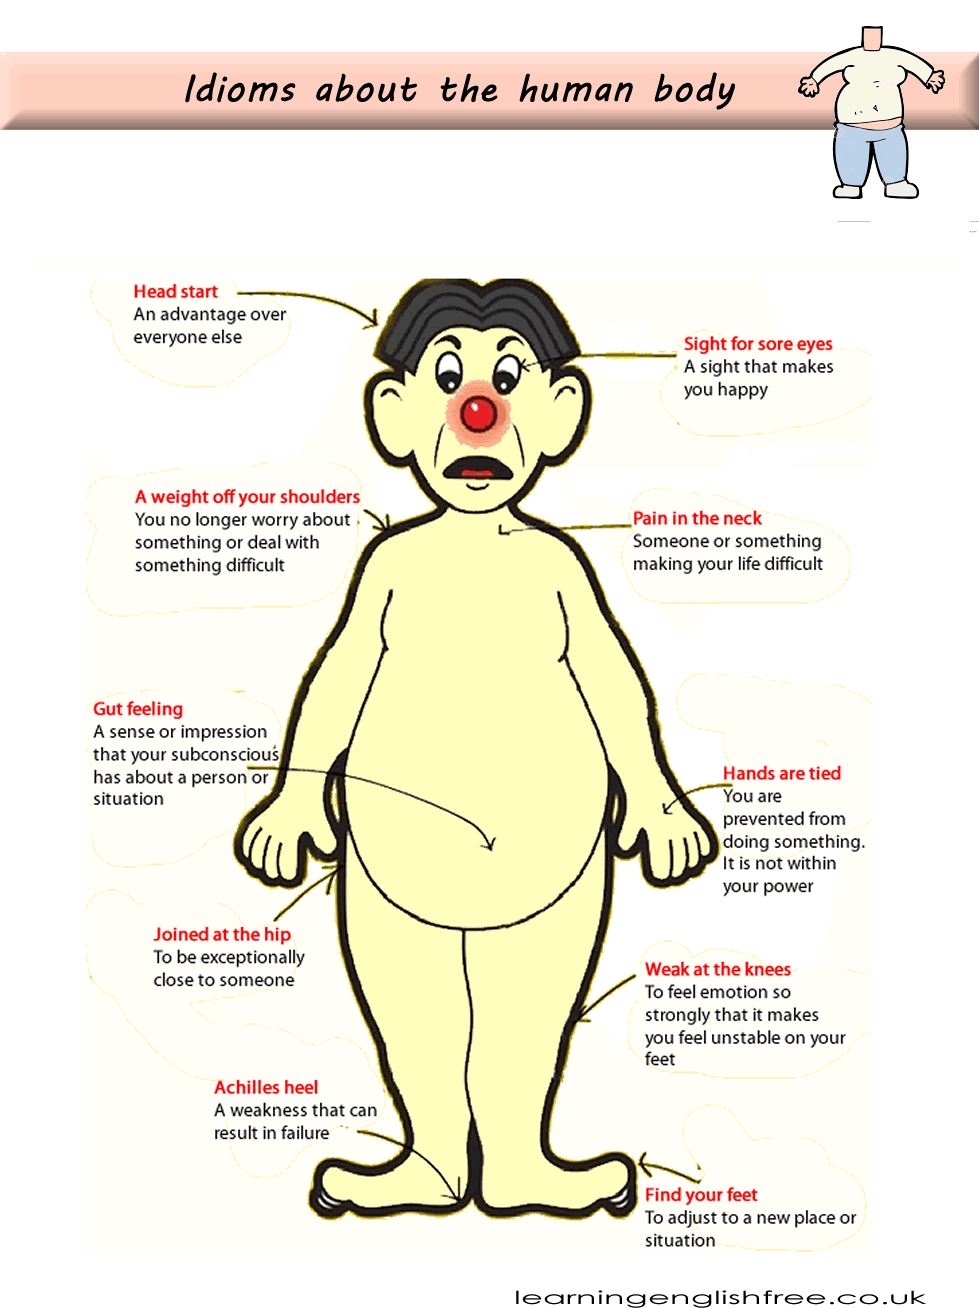 This lesson provides a comprehensive guide to understanding and using idioms related to the human body in English. It explains ten common idioms with examples and tips for remembering and applying them in everyday conversations. The lesson is designed to be accessible for English learners of all levels, enhancing their language skills with these colourful expressions.